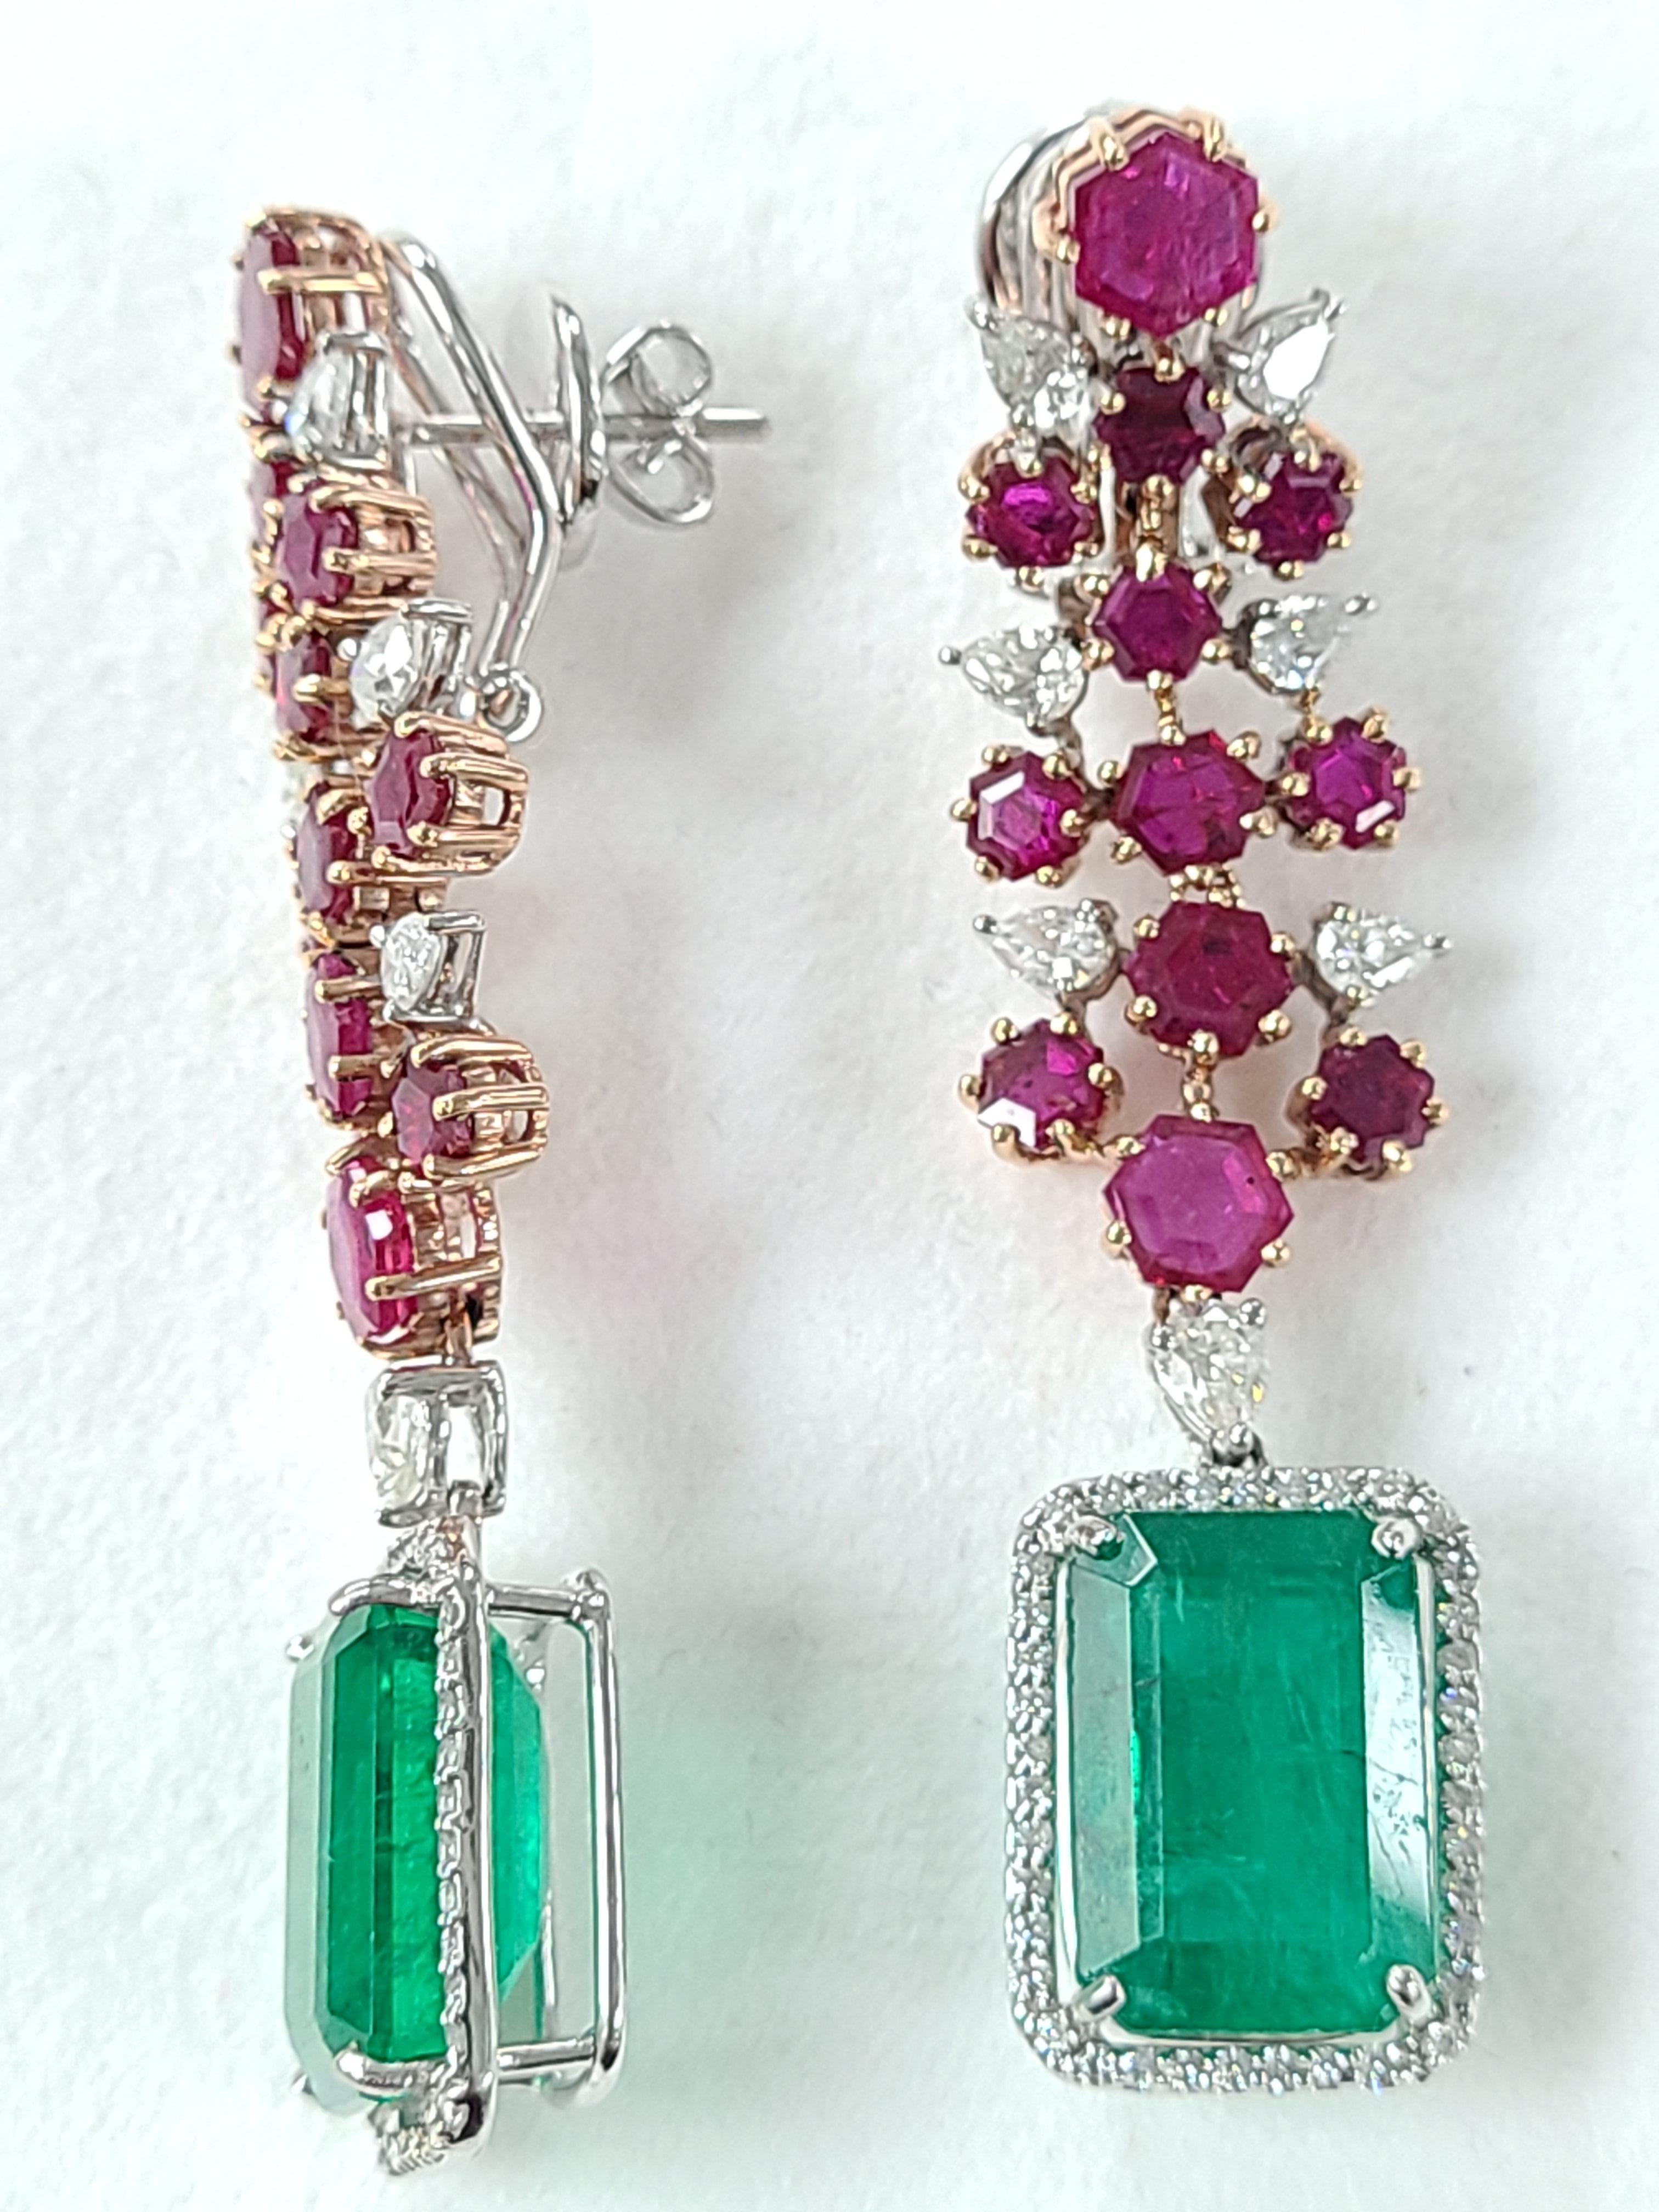 A beautiful and Party wear cocktail earrings set in 18k gold with Natural Zambian emeralds and No heat ruby from Mozambique . The emerald weight is 17.18 carats and ruby weight is 6.18 carats . diamond weight is 2.06 carats. The length of the